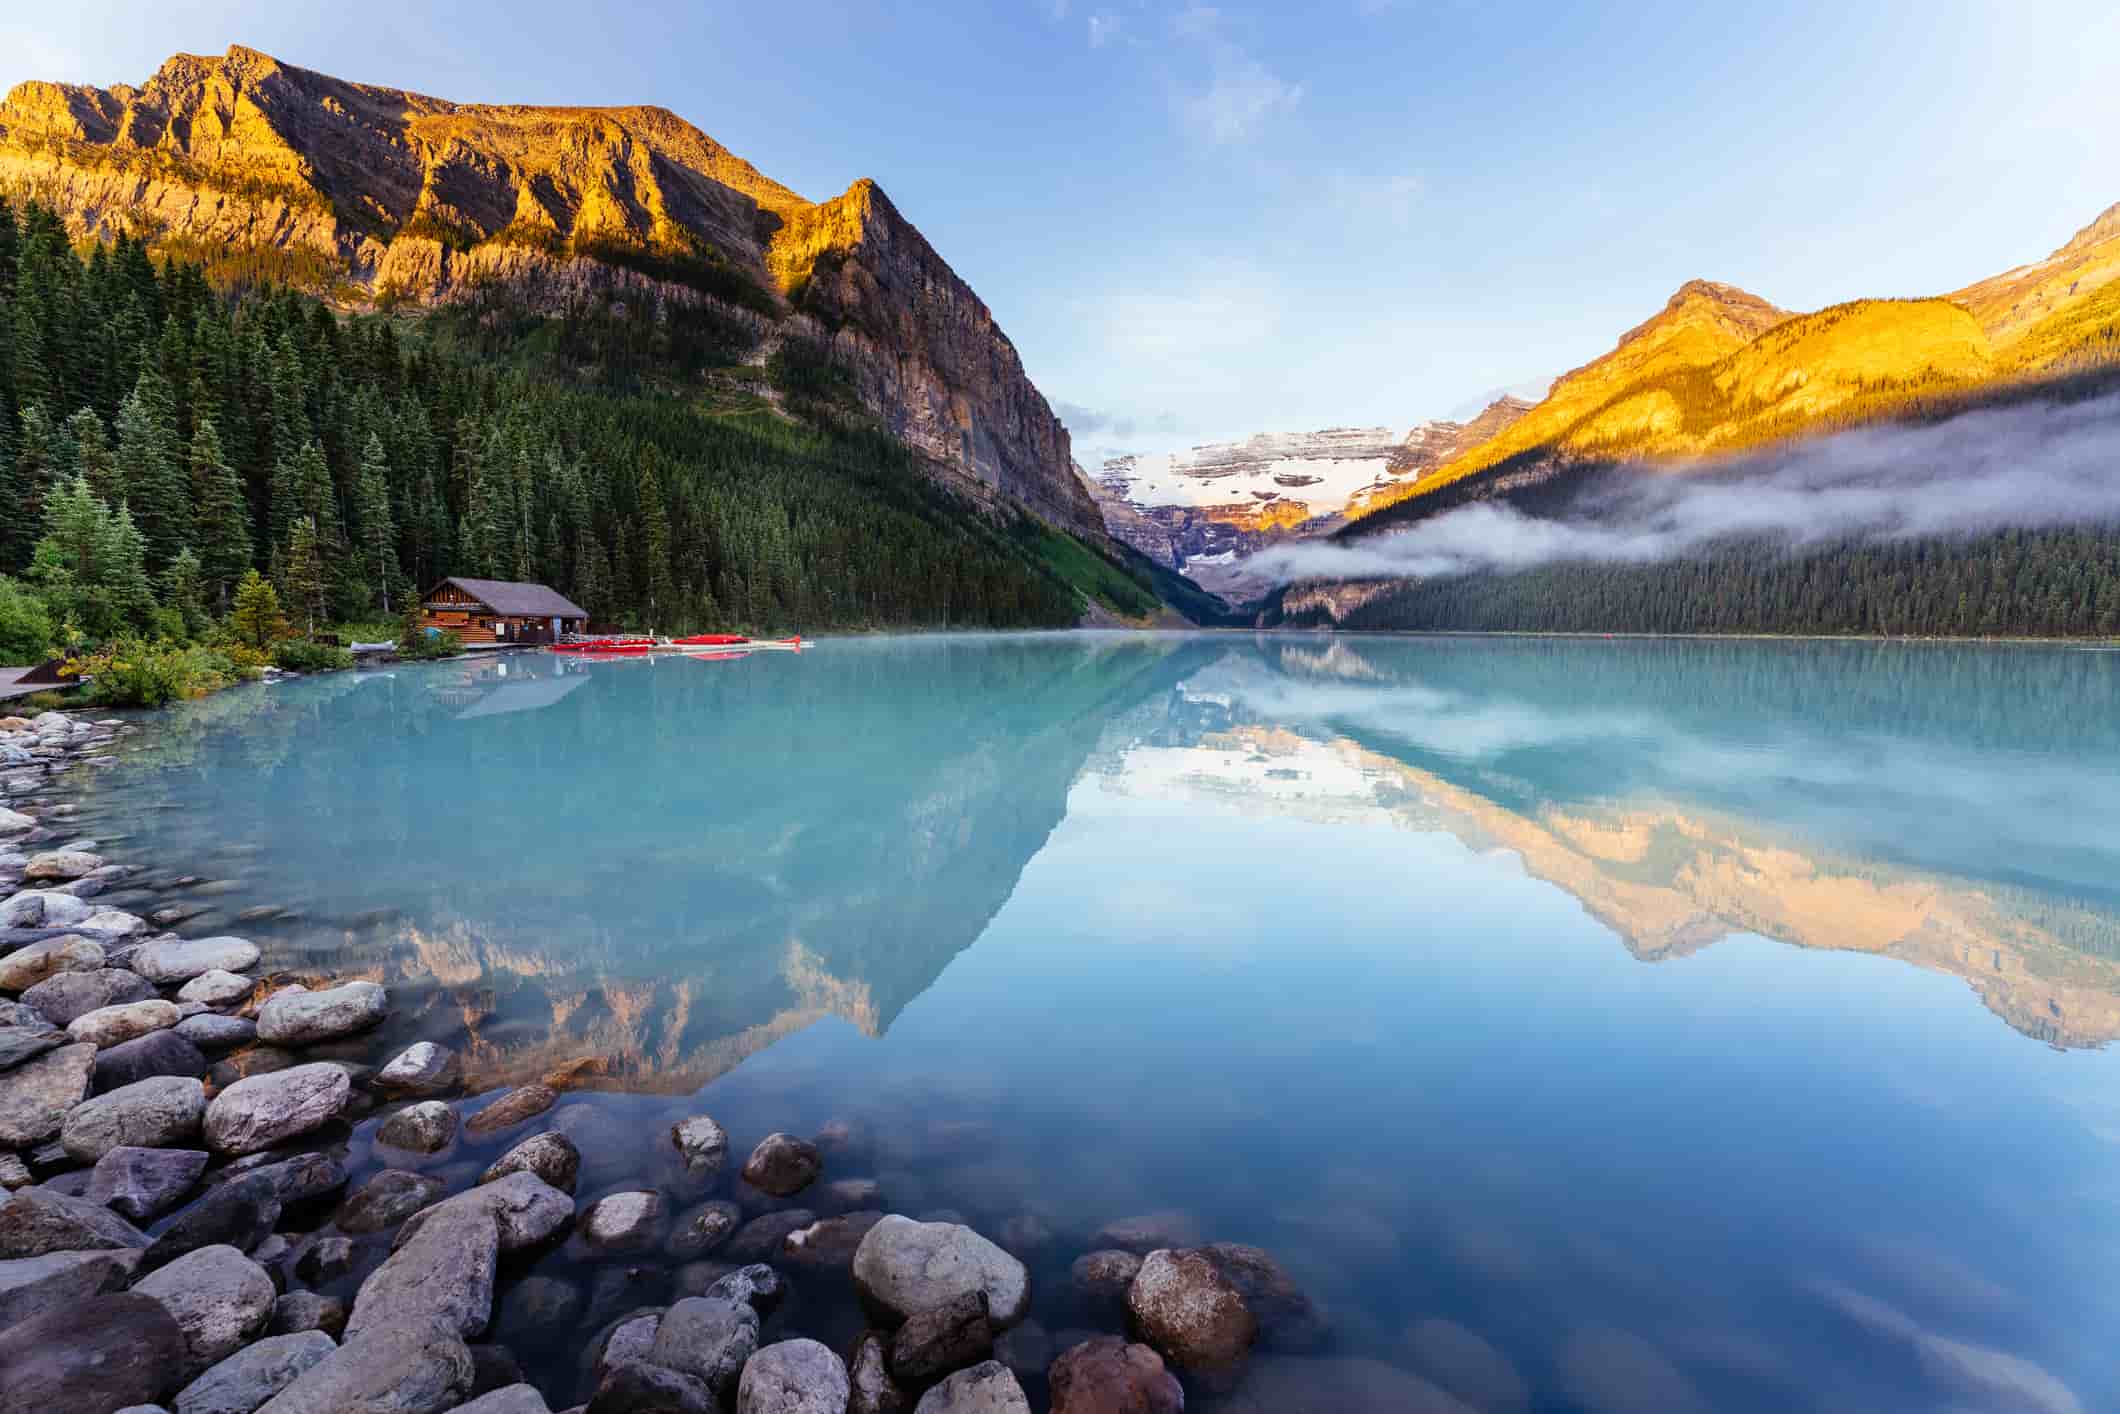 Lake Louise at sunrise, calm water and light on the mountain tops.